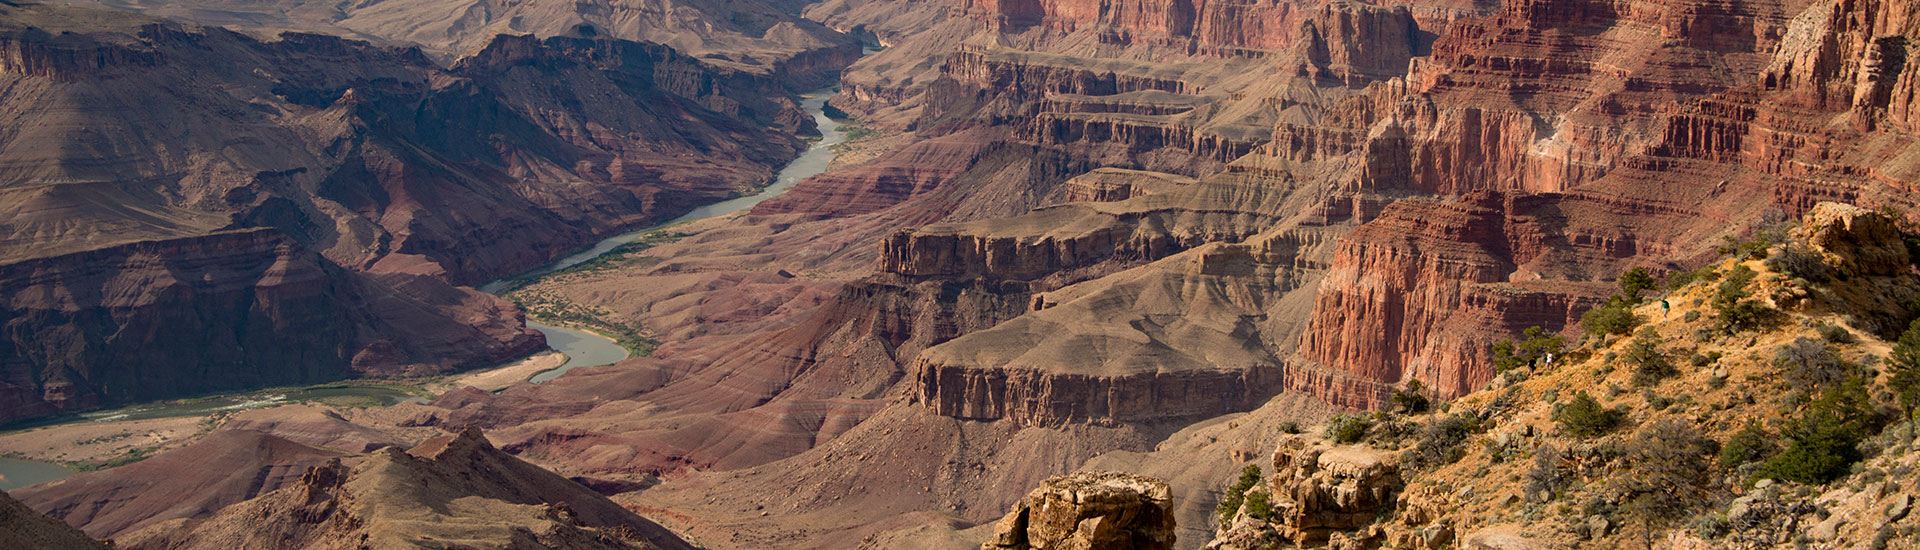 View of the Colorado River from the South Rim of Grand Canyon National Park.